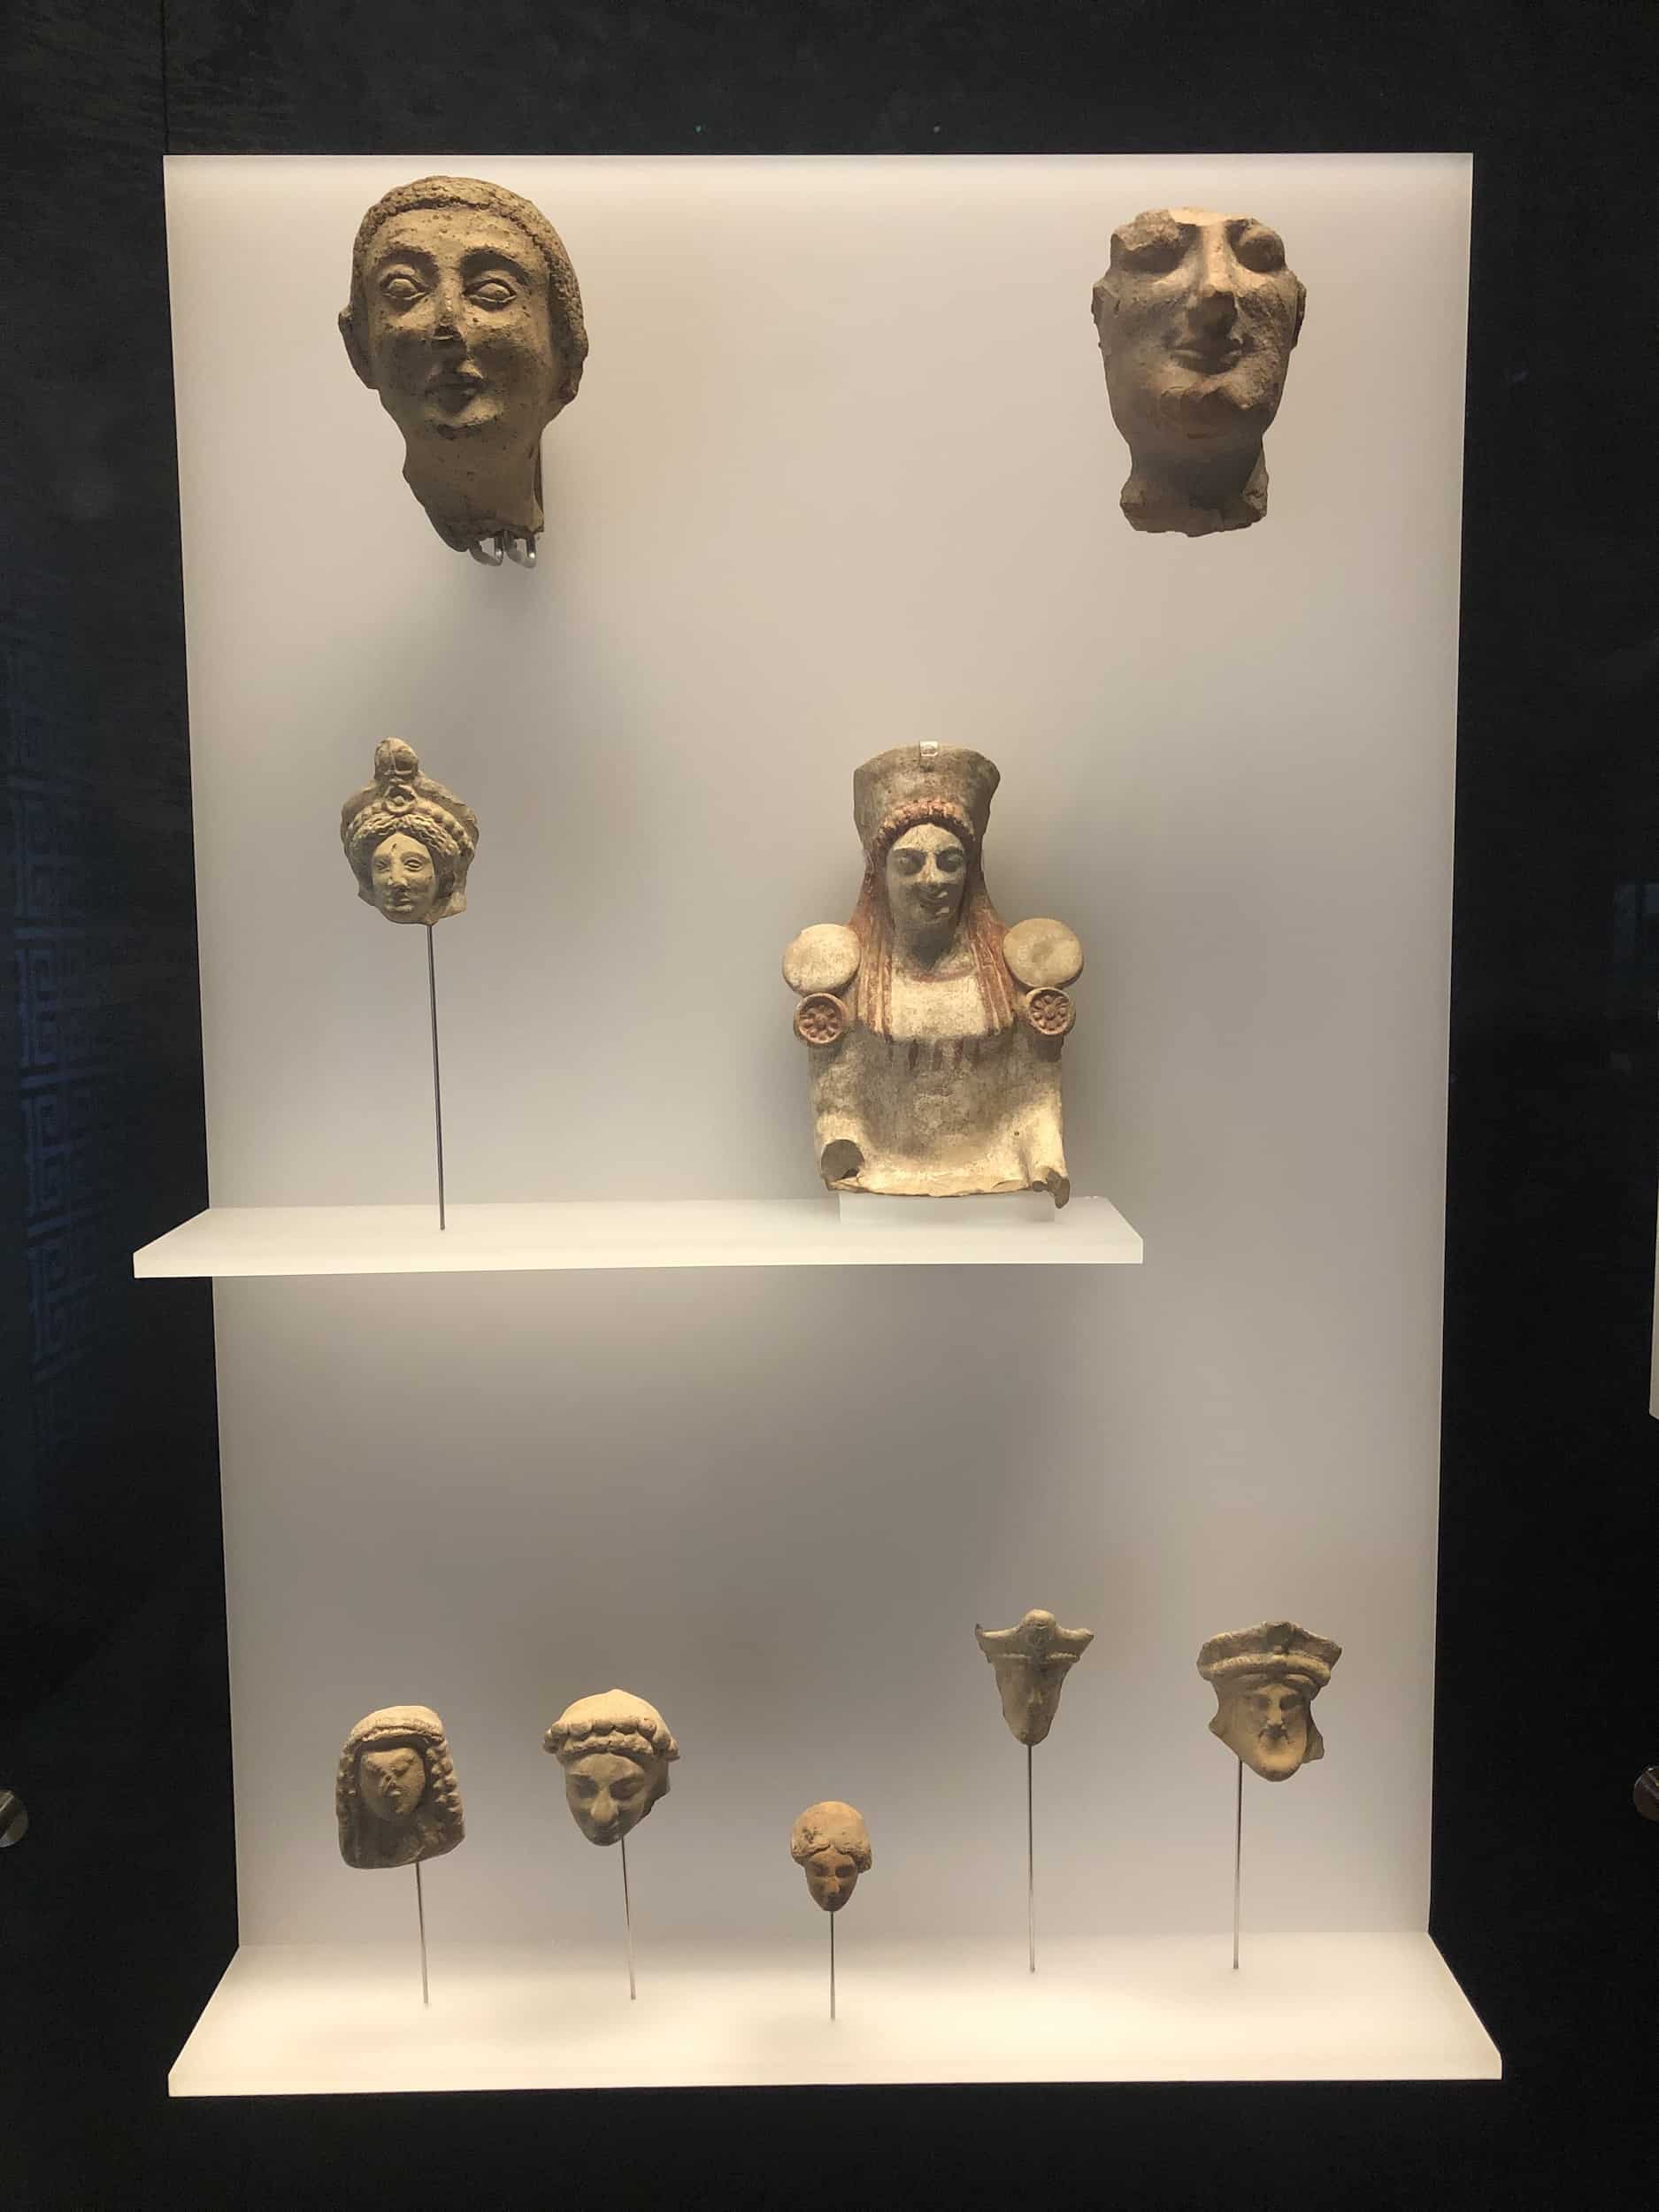 Hellenistic artifacts